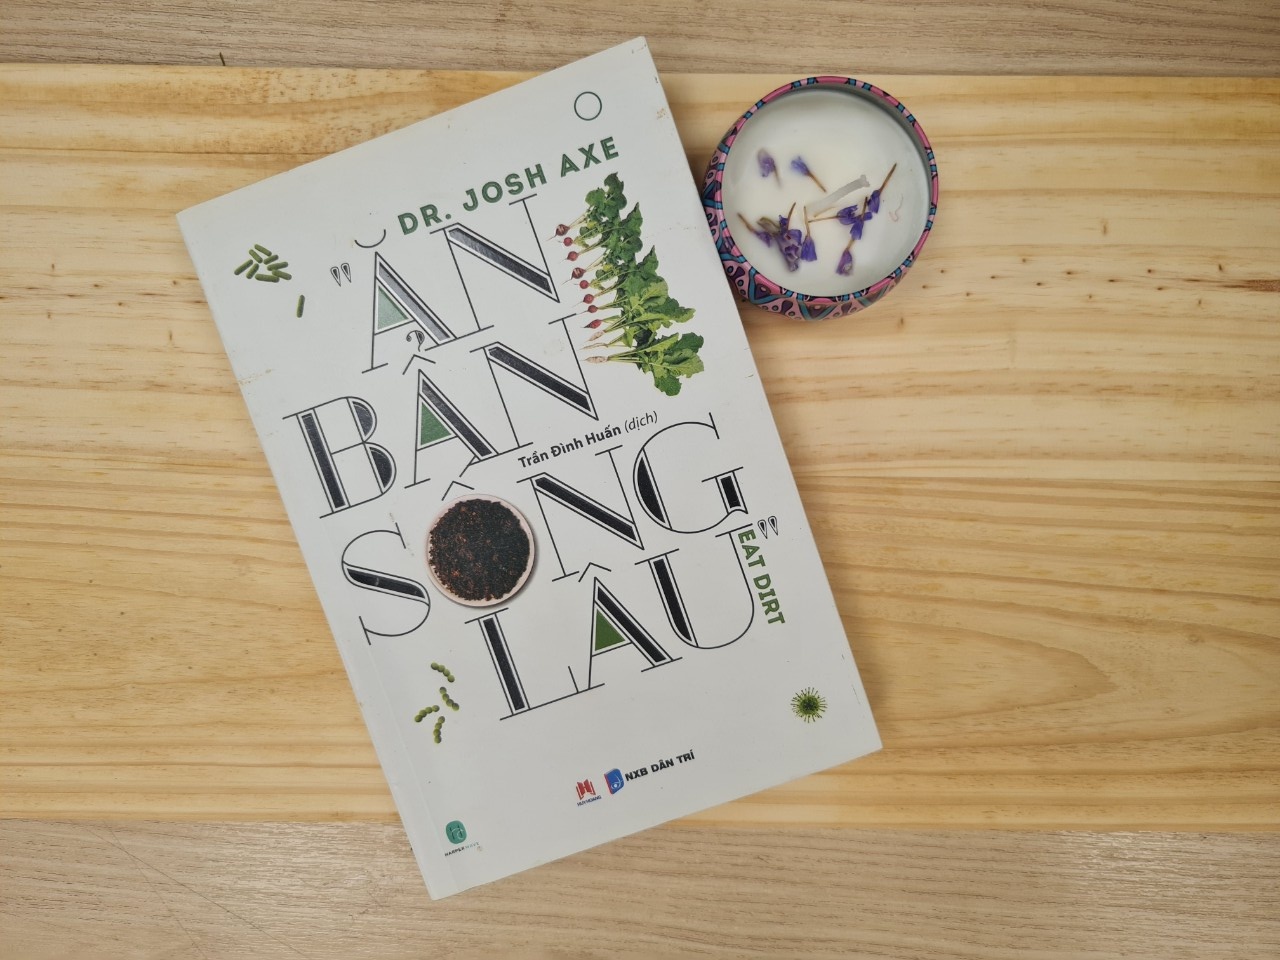 An ban song lau anh 2